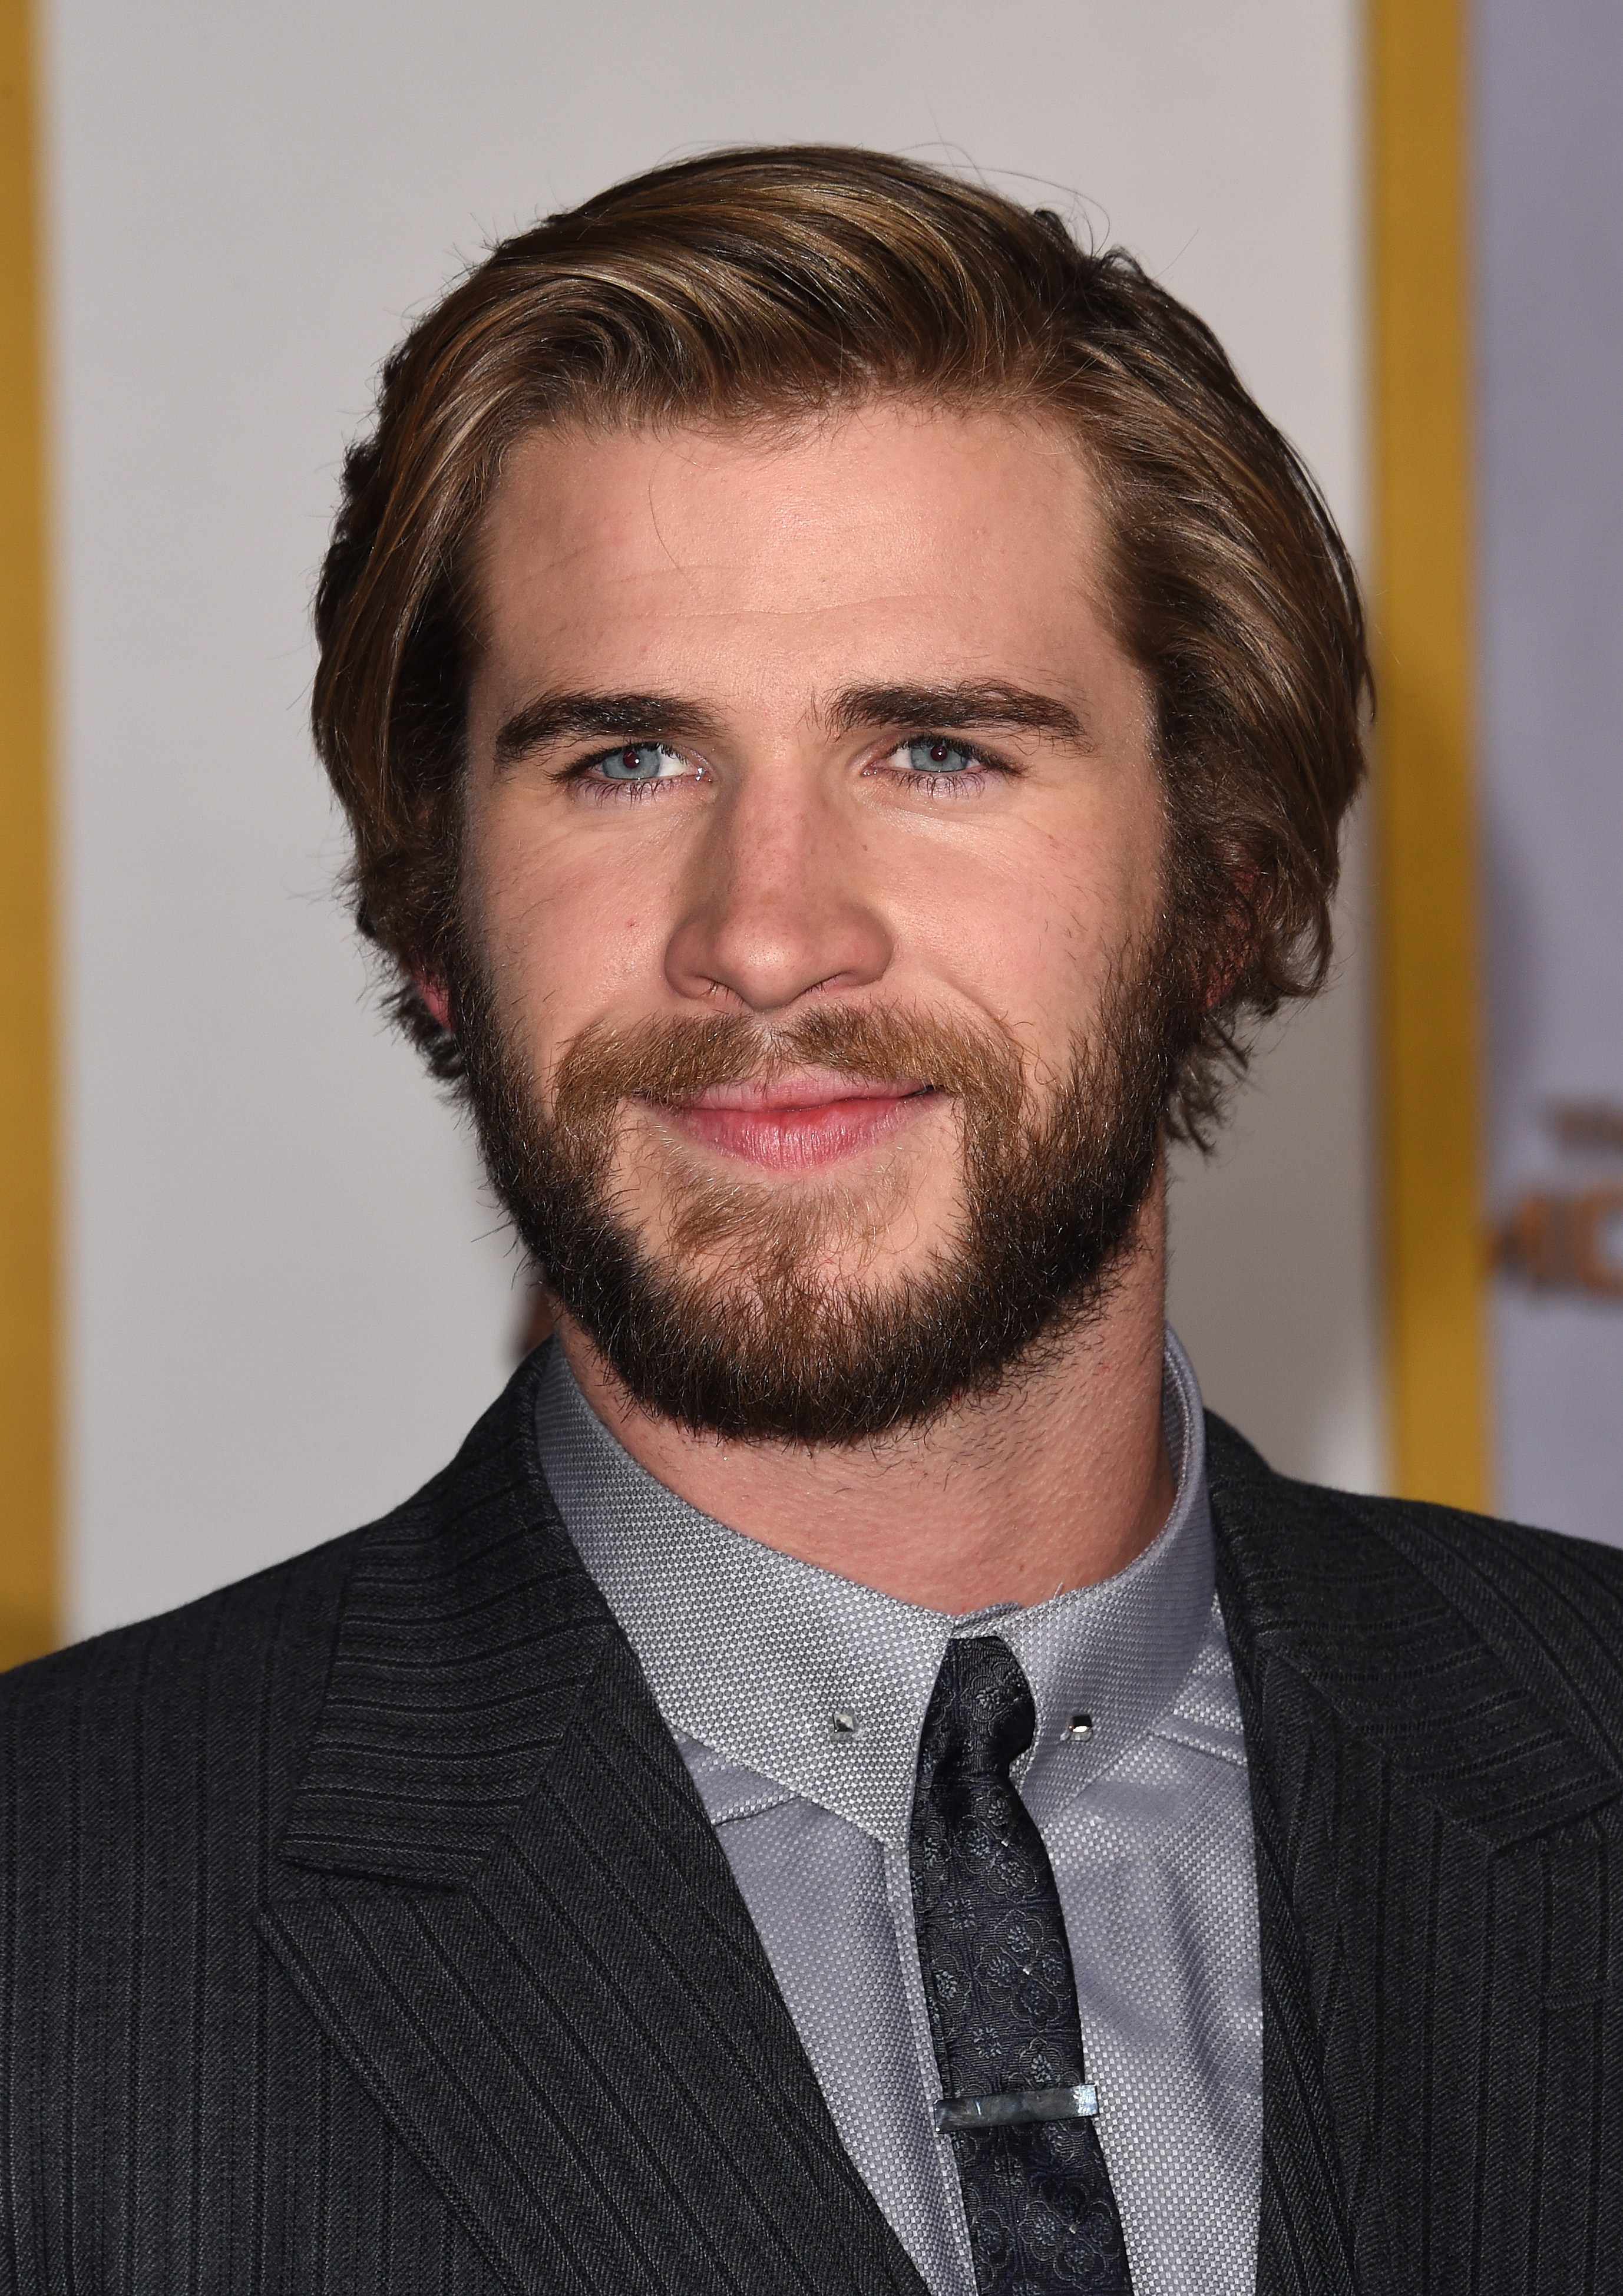 Liam Hemsworth Rocks Center Part Hair, Hits Us With Waves 